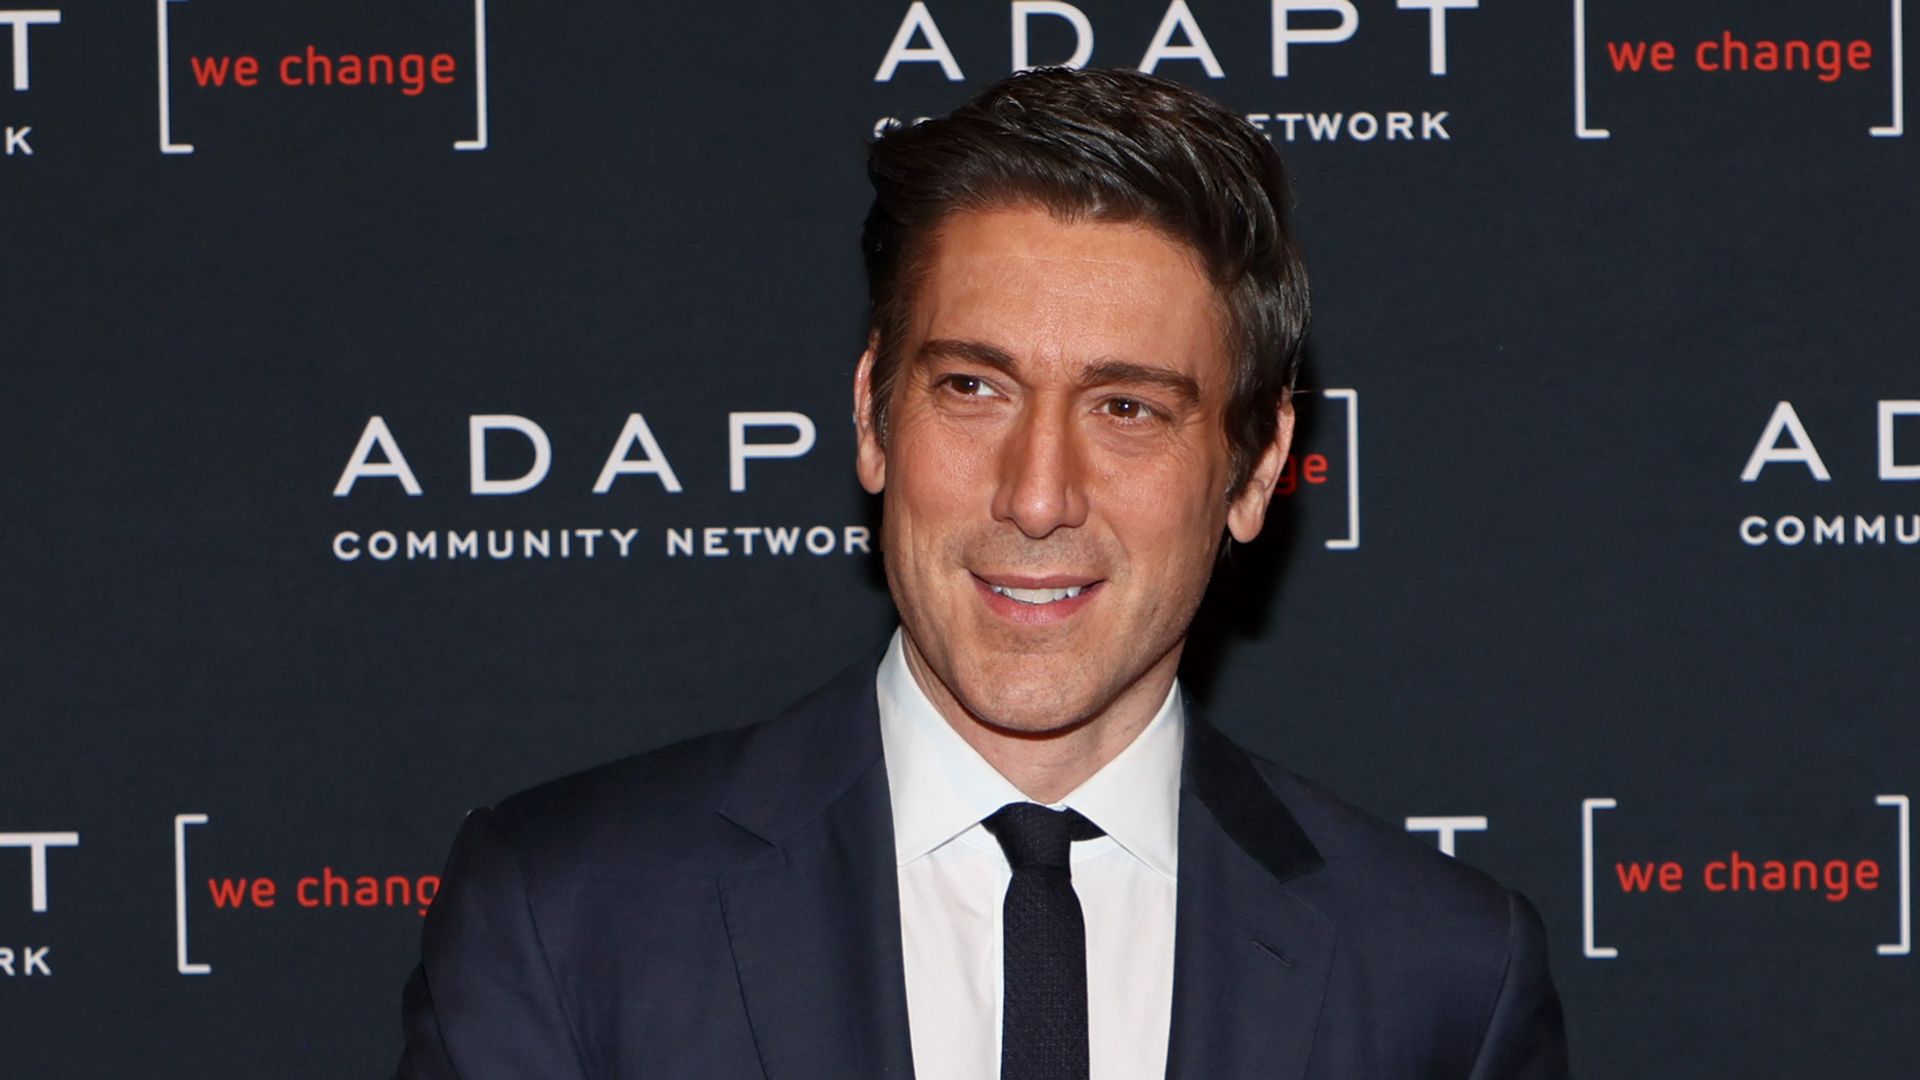 David Muir attends the 2022 ADAPT Leadership Awards at Cipriani 42nd Street on March 10, 2022 in New York City.